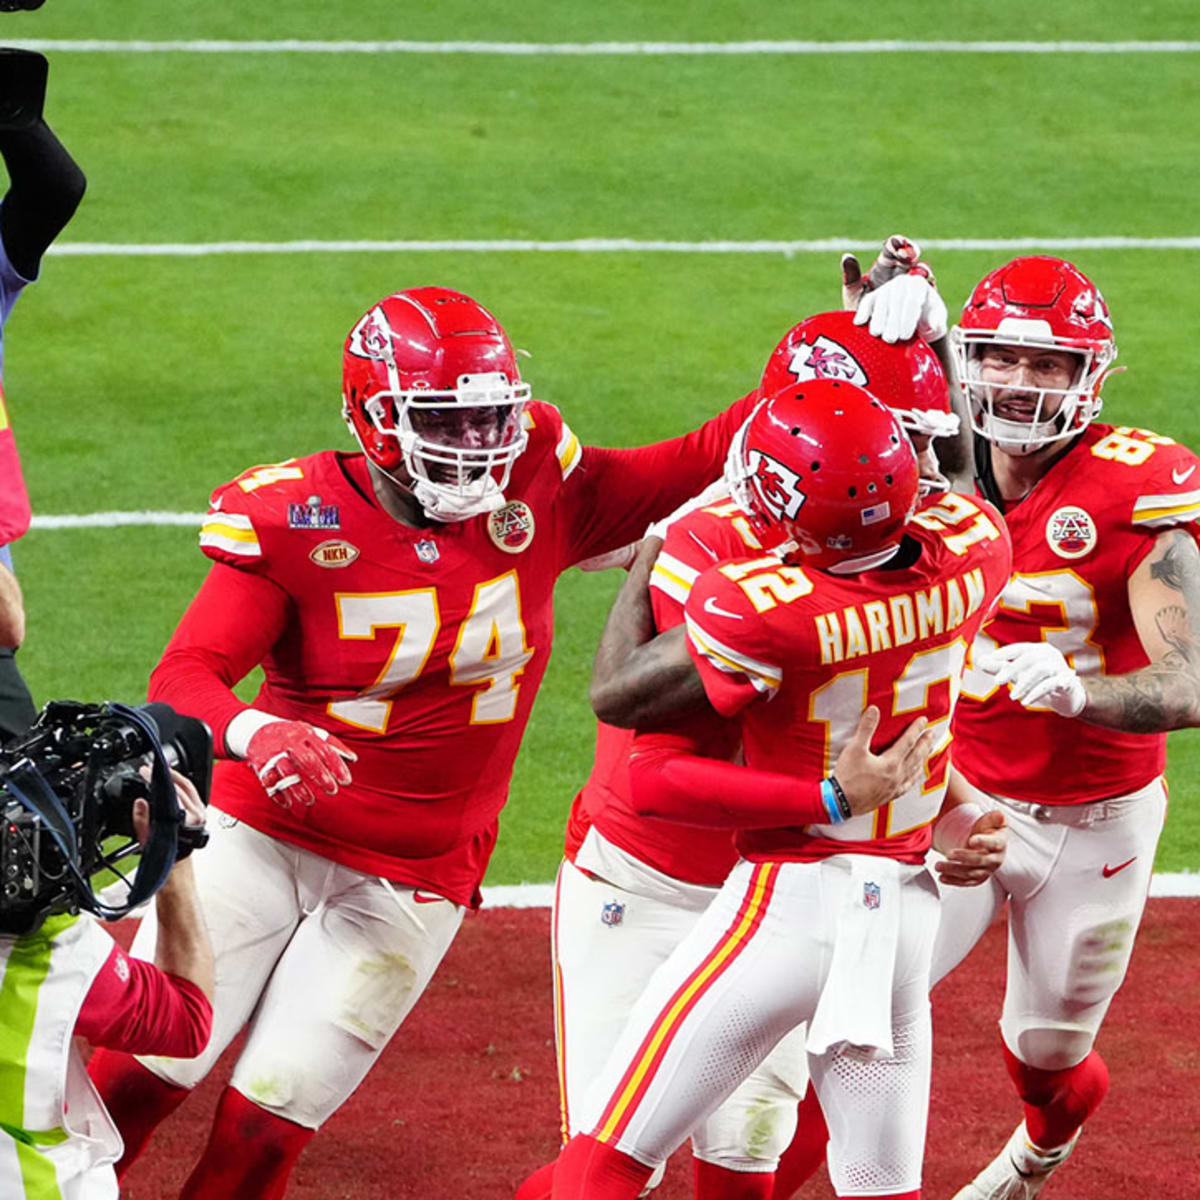 Chiefs were down but never out in their quest for a repeat